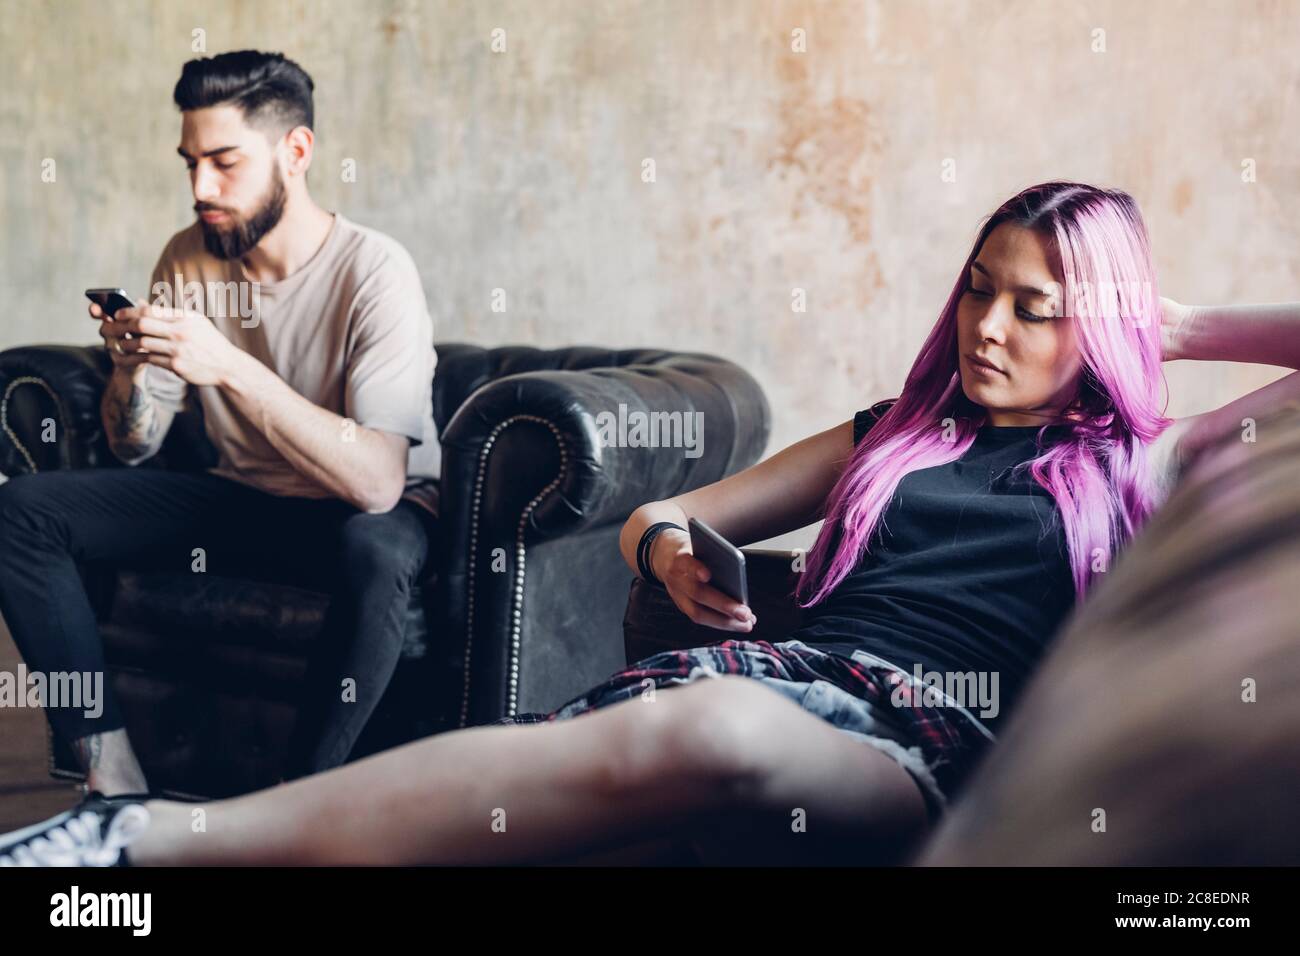 Young man and woman sitting on sofa and armchair in a loft using smartphones Stock Photo